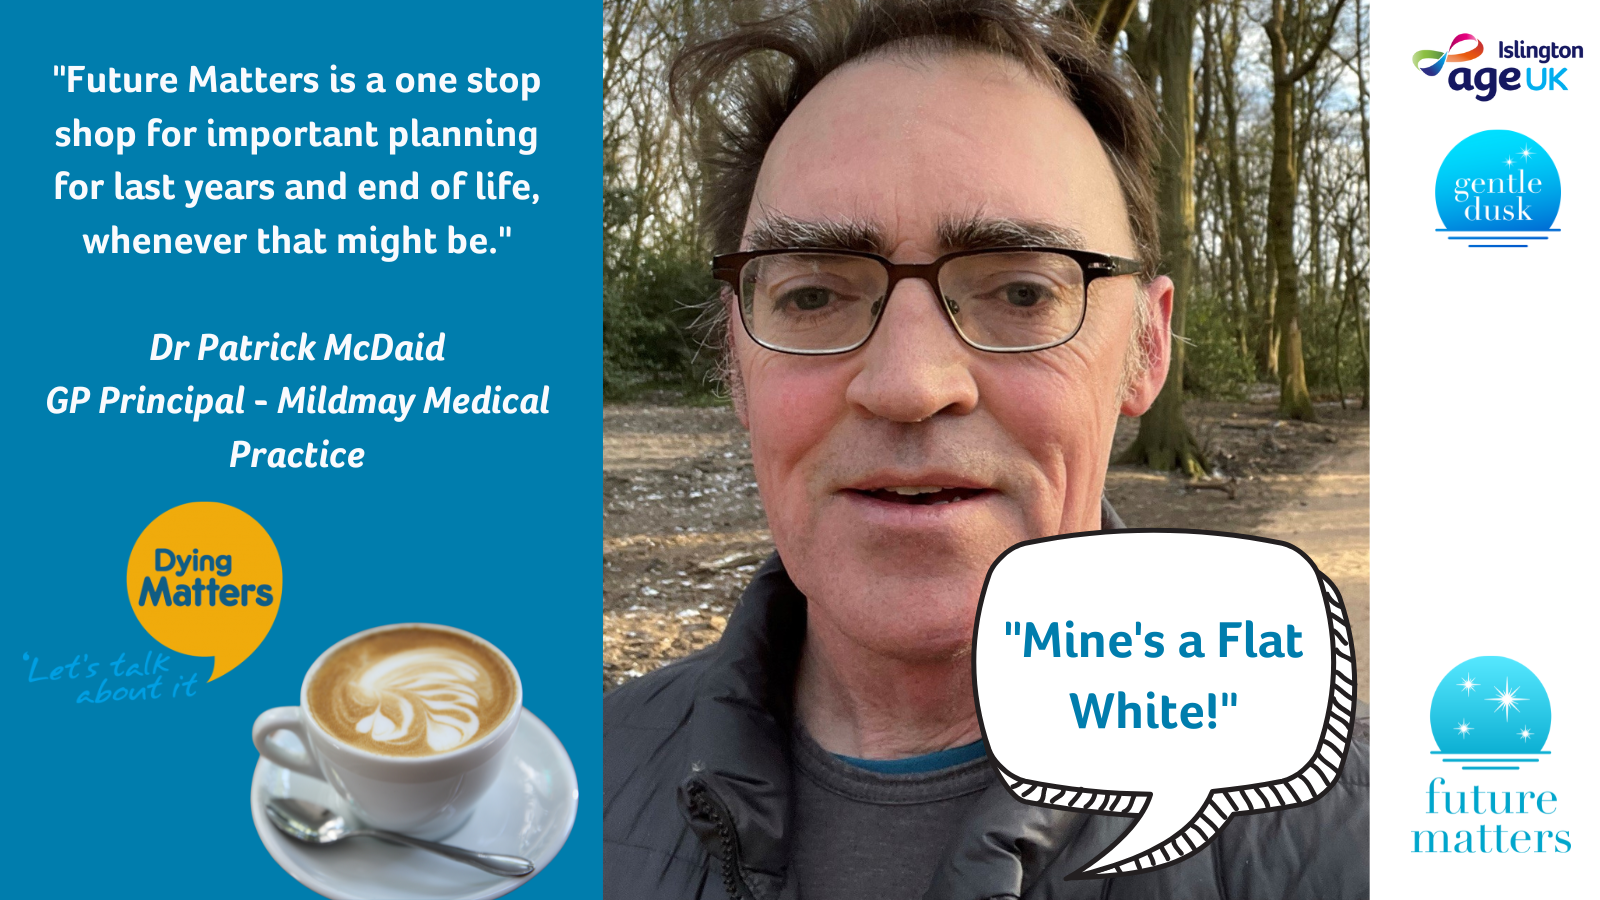 Dr Patrick McDaid and photo of a flat white coffee